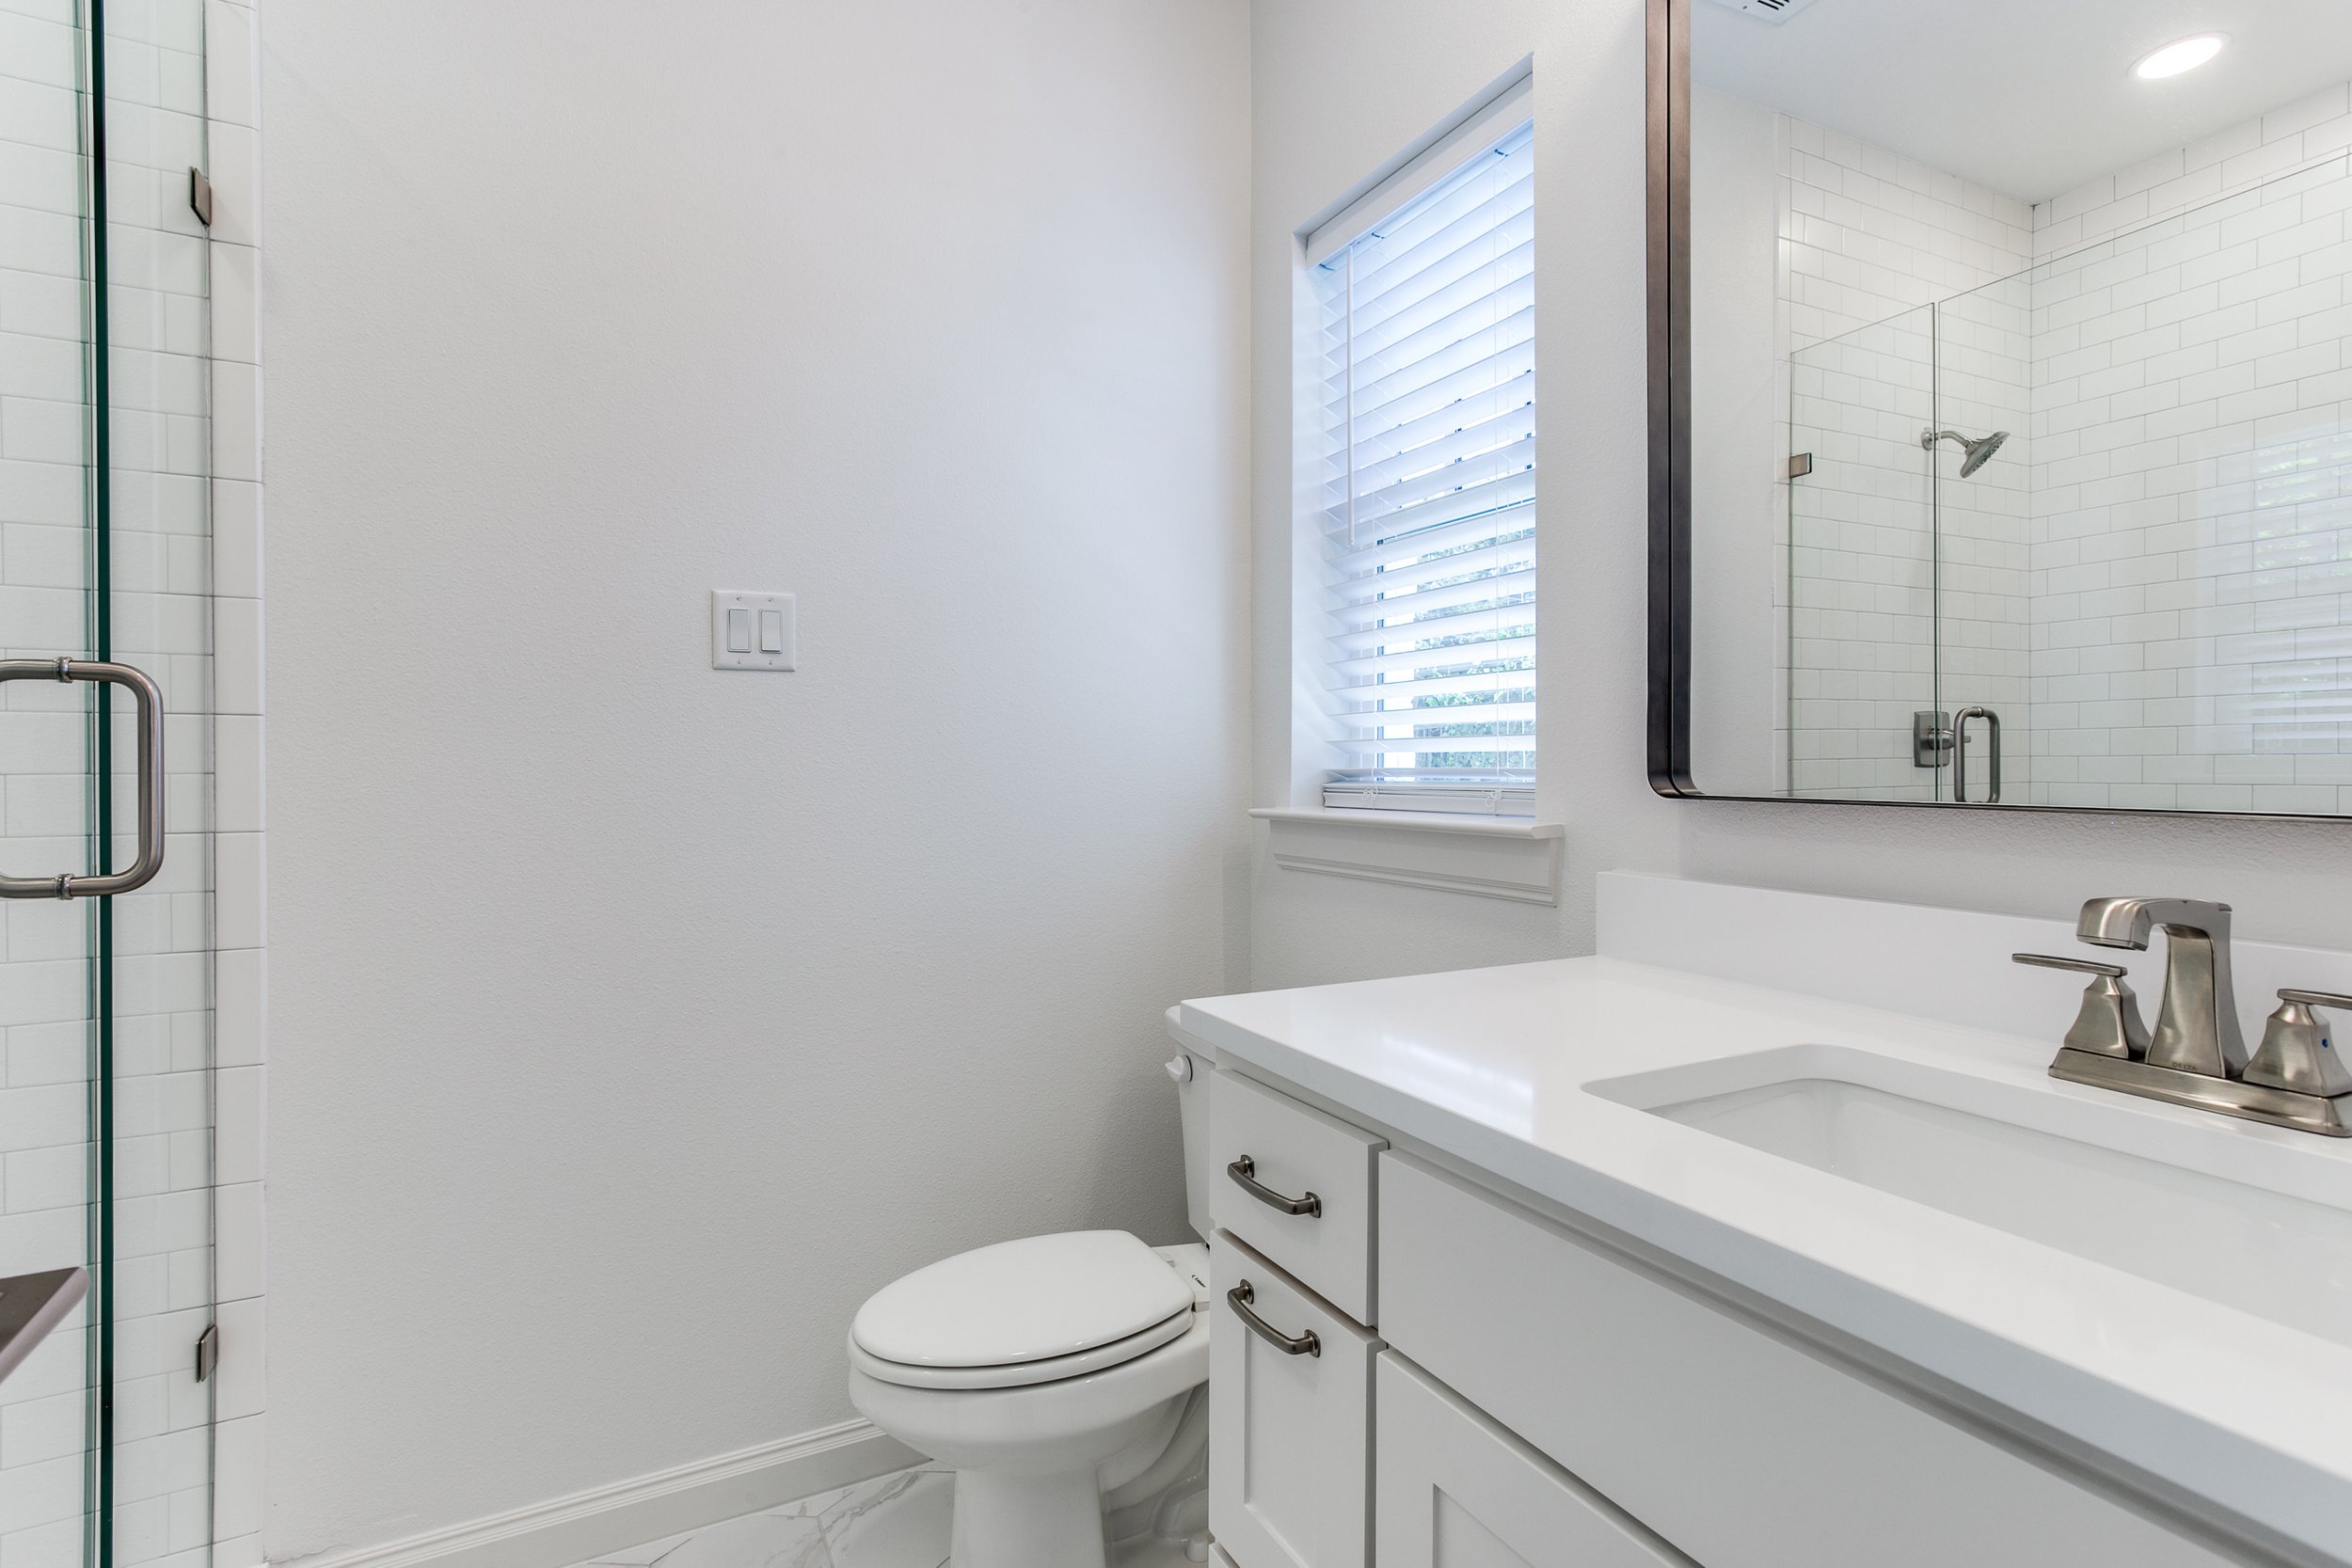 2629-lubbock-ave-fort-worth-tx-76109-High-Res-15.jpg